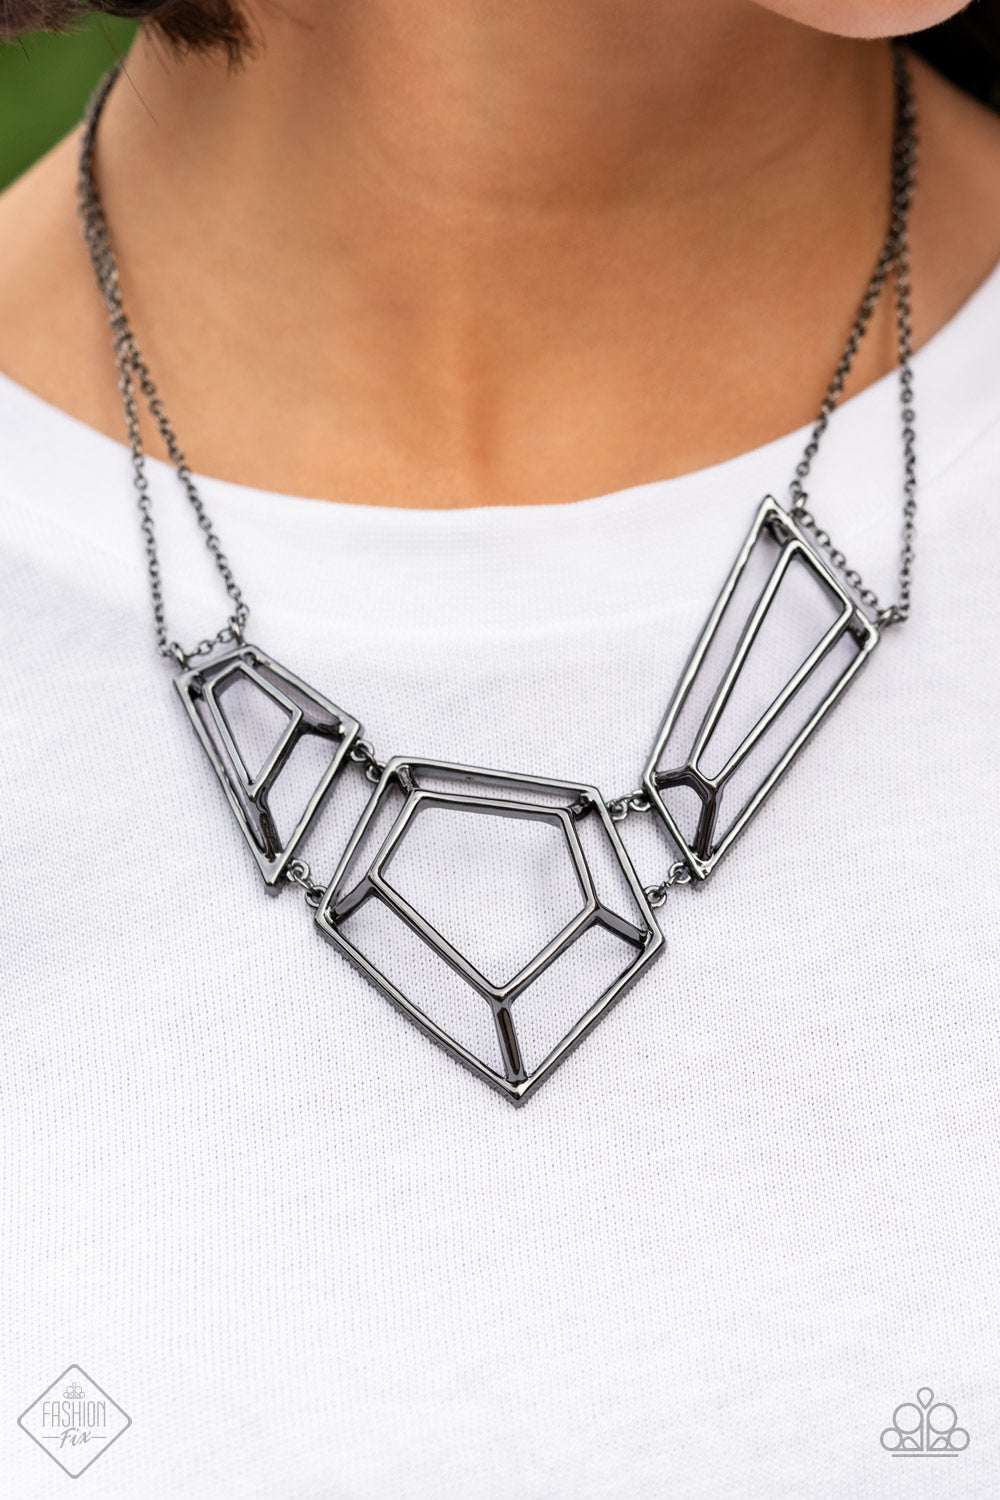 ​3-D Drama - Black Metal (Gunmetal) Fashion Necklace -  Paparazzi Accessories - Glistening gunmetal bars connect into edgy 3-dimensional frames below the collar, creating a bold geometric statement unique necklace. Features an adjustable clasp closure. Sold as one individual necklace.